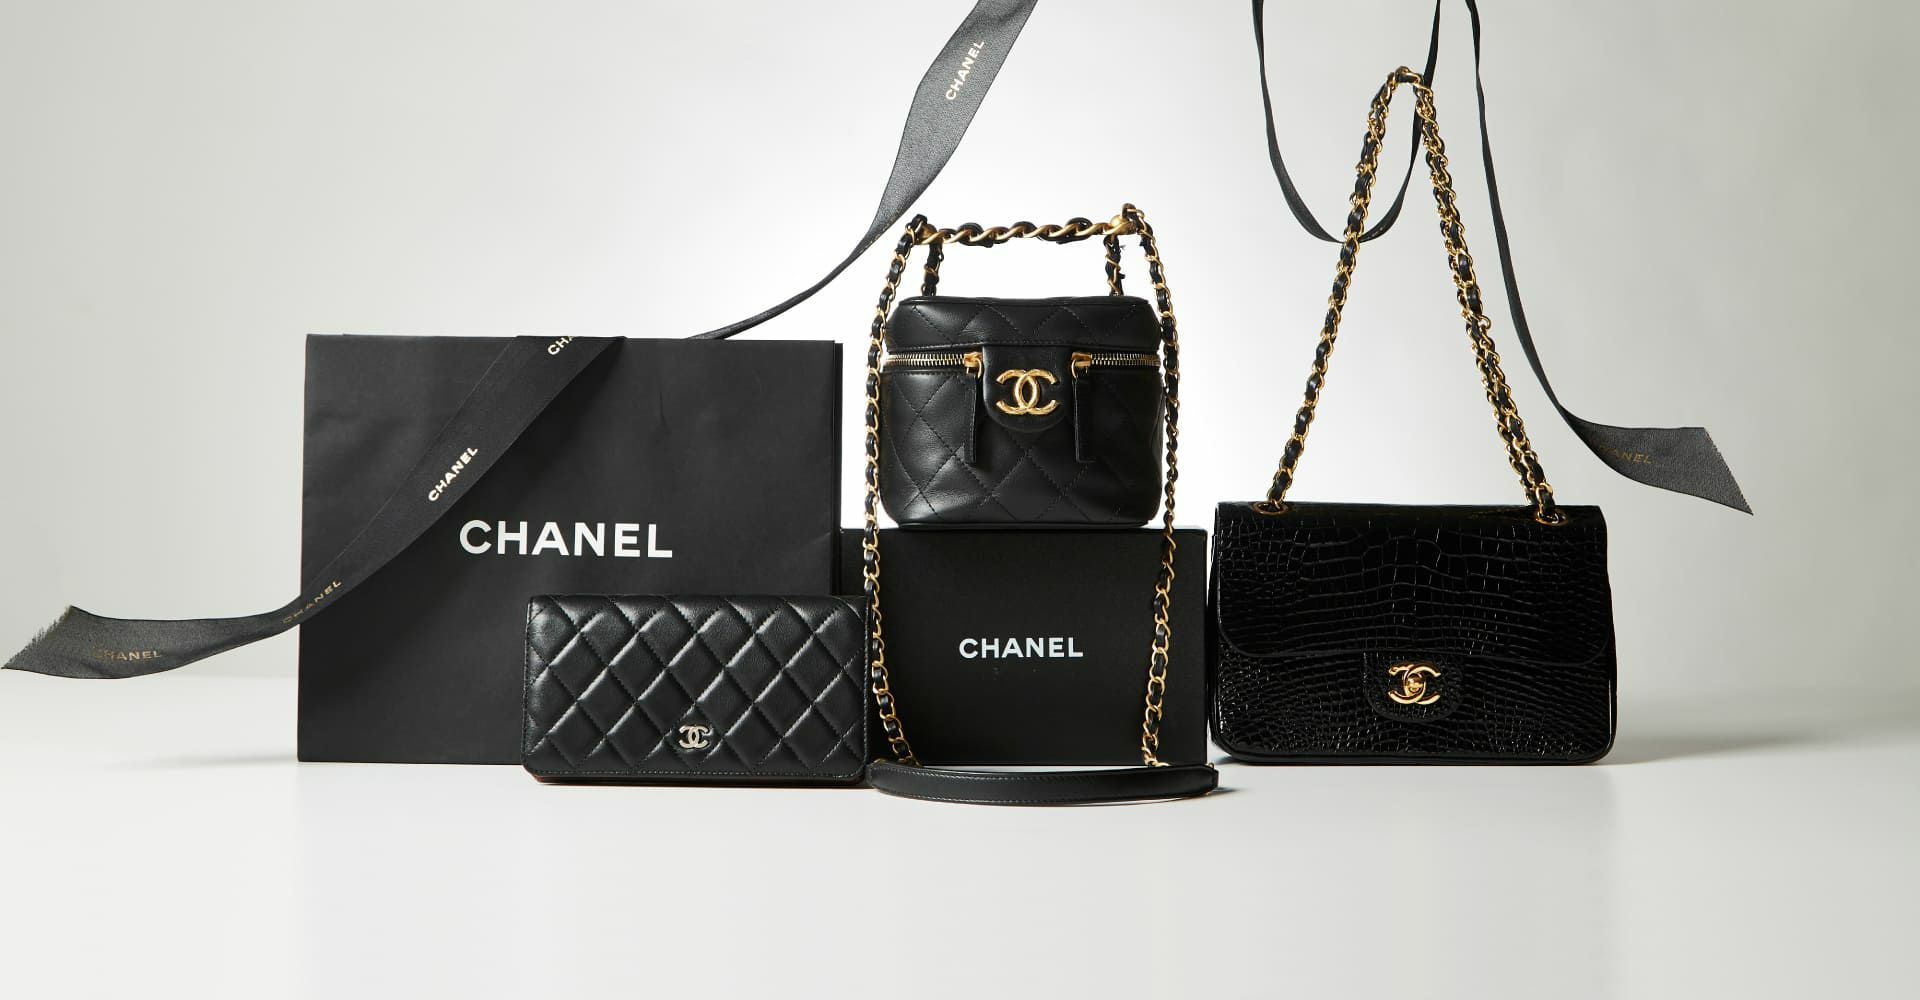 CHANEL – Japan second hand luxury bags online supplier Arigatou Share Japan